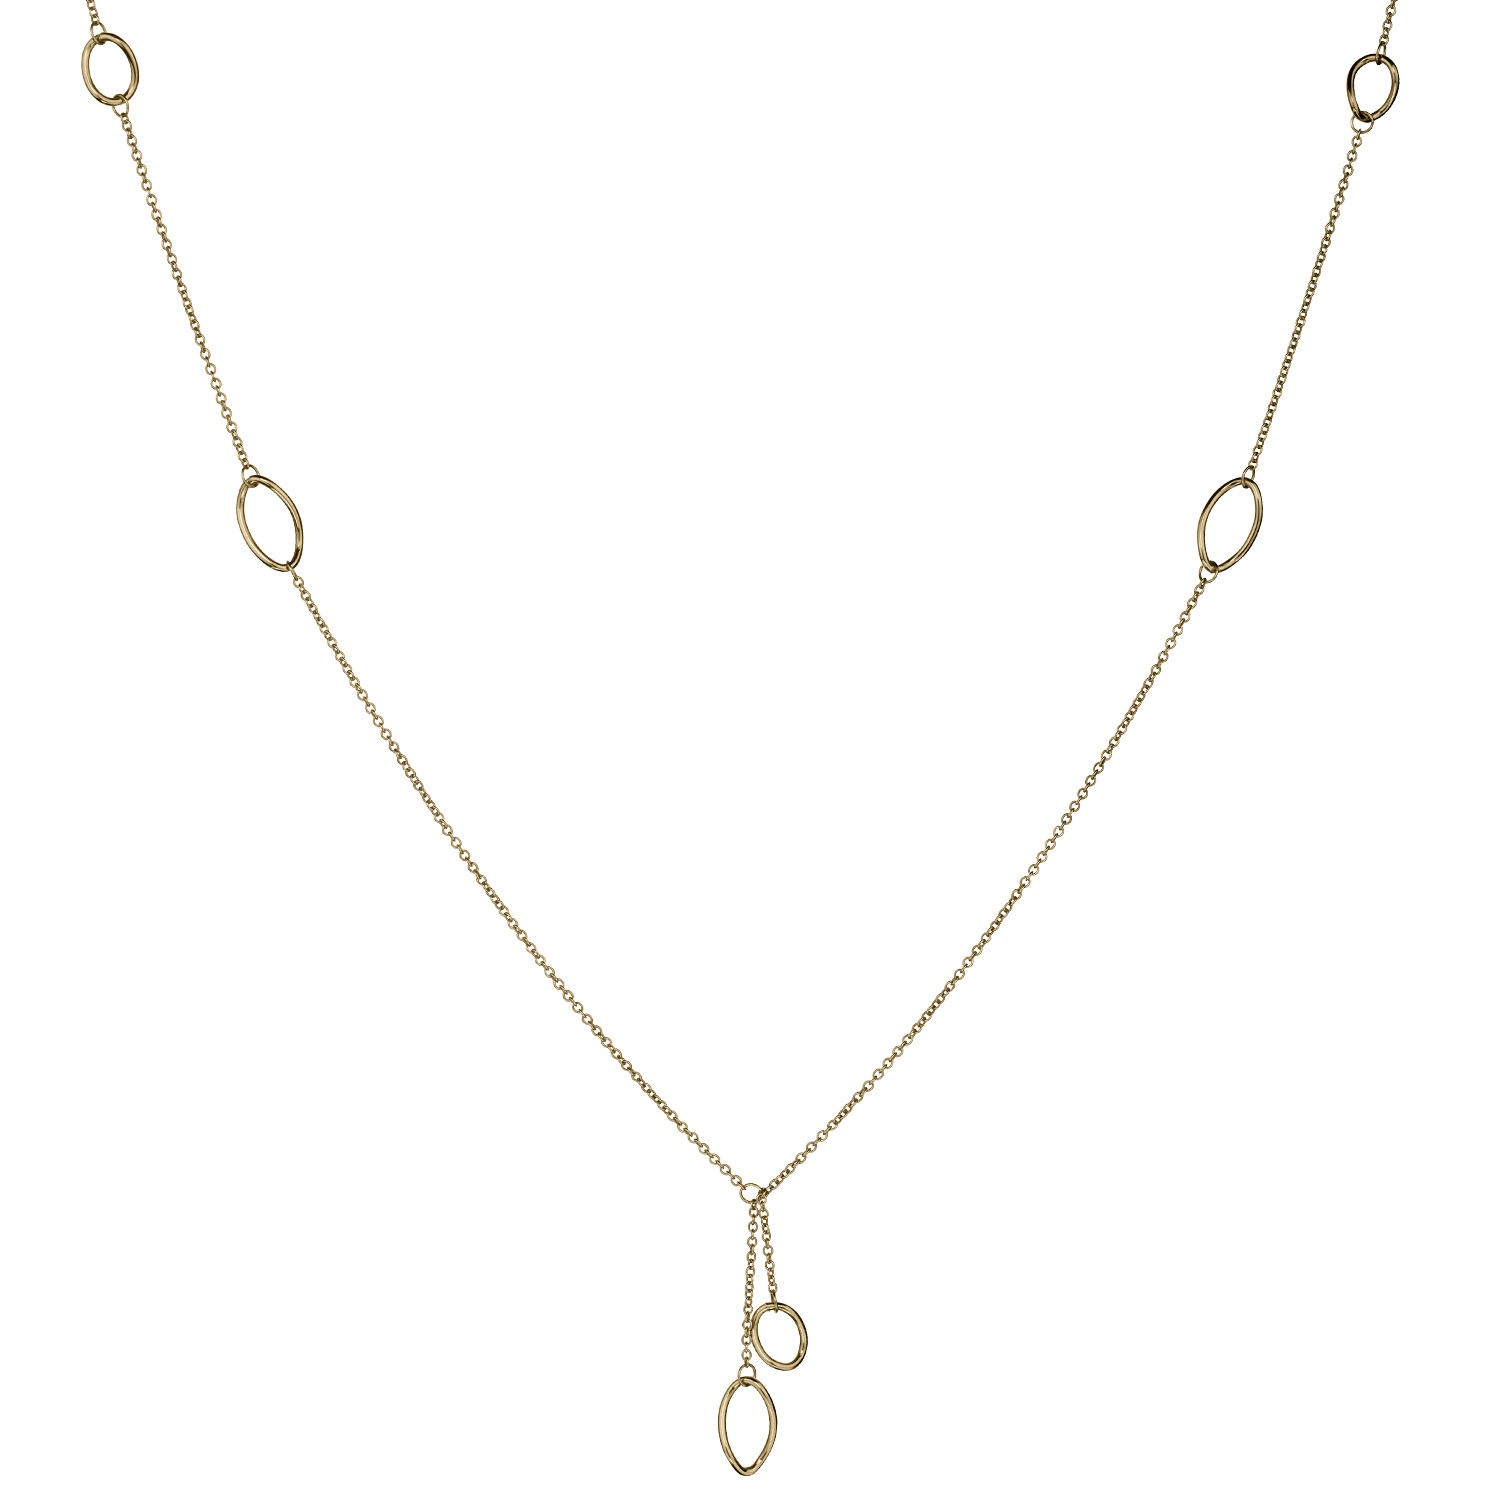 14kt Yellow Gold Fancy Necklace. Necklaces and Pendants. Griffin Jewellery Designs. 